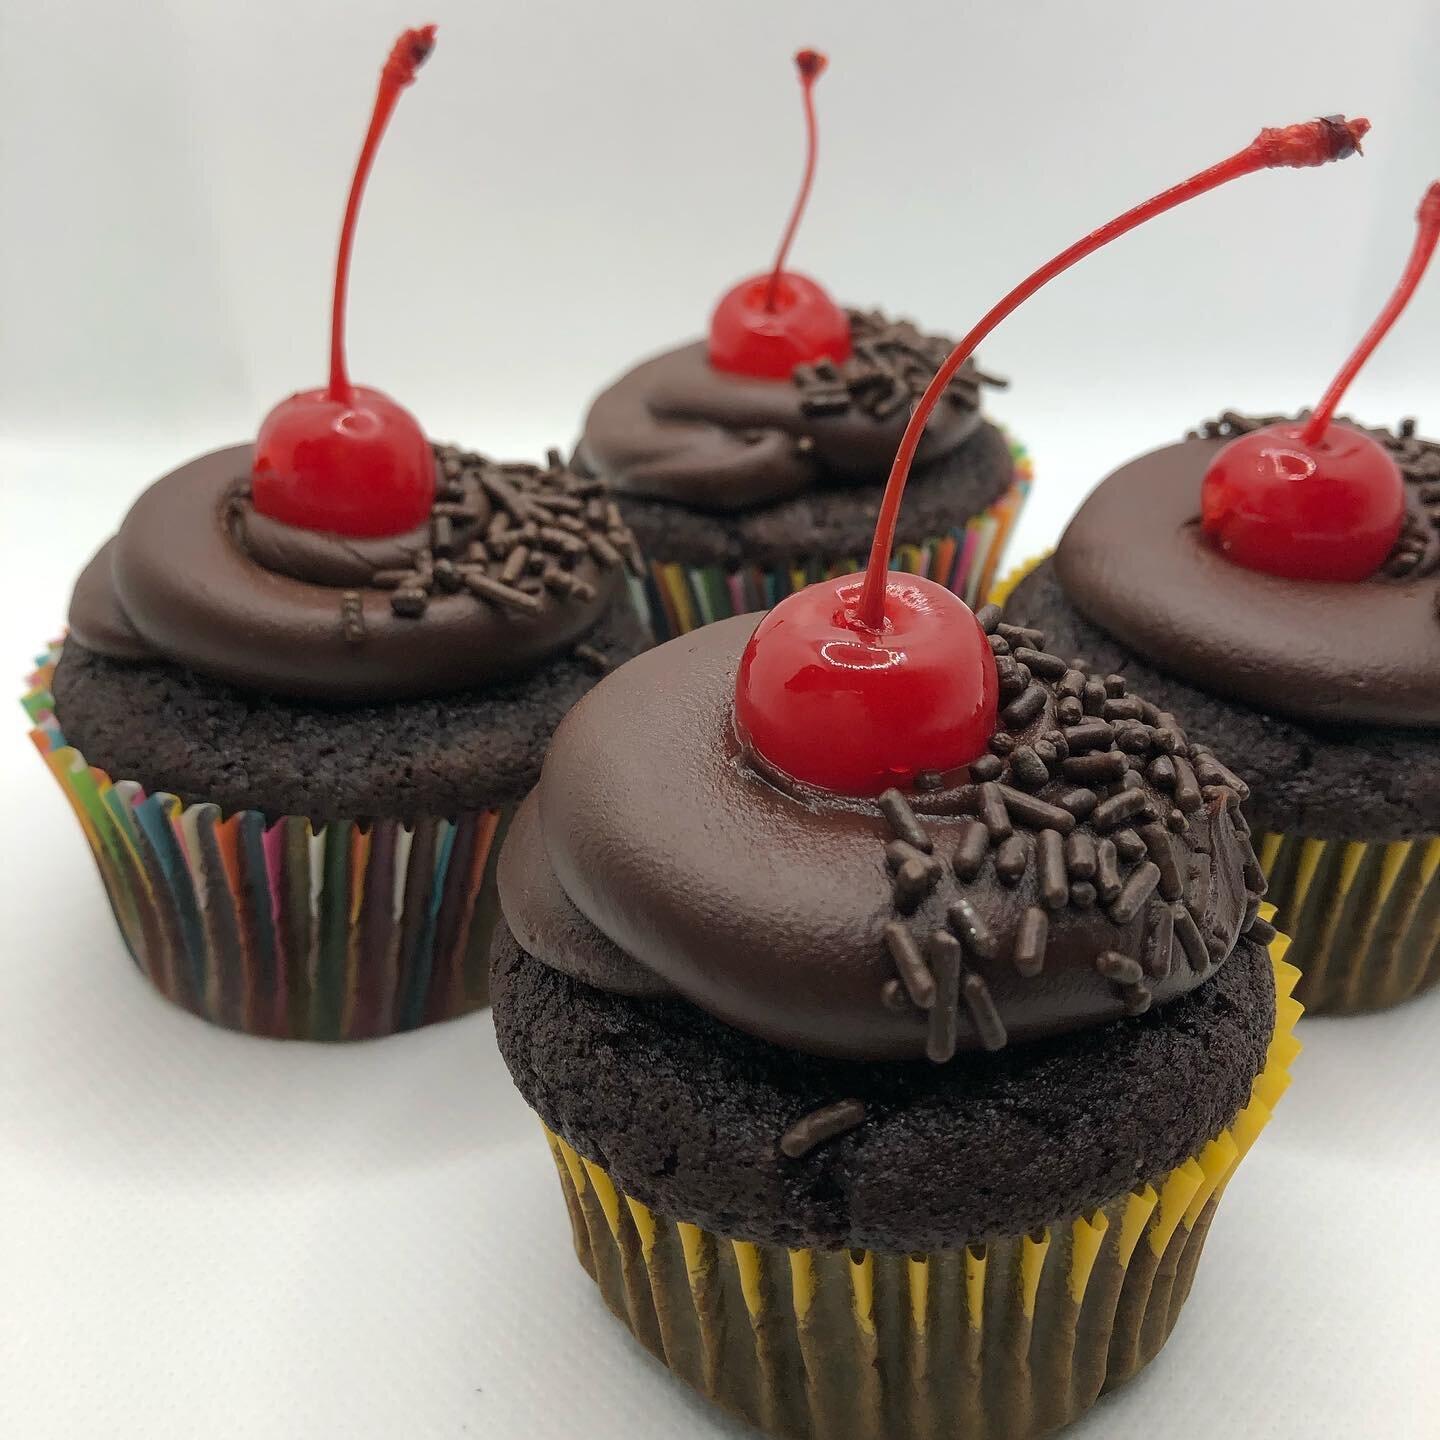 Feeding my cherry obsession this weekend. Chocolate #cupcakes with a cherry jam filling and chocolate ganache! 

#cupcakesofinstagram #sweets #chocolate #nomnomnom #desserts #cherry #yummy #sweettooth #sweetsofinstagram